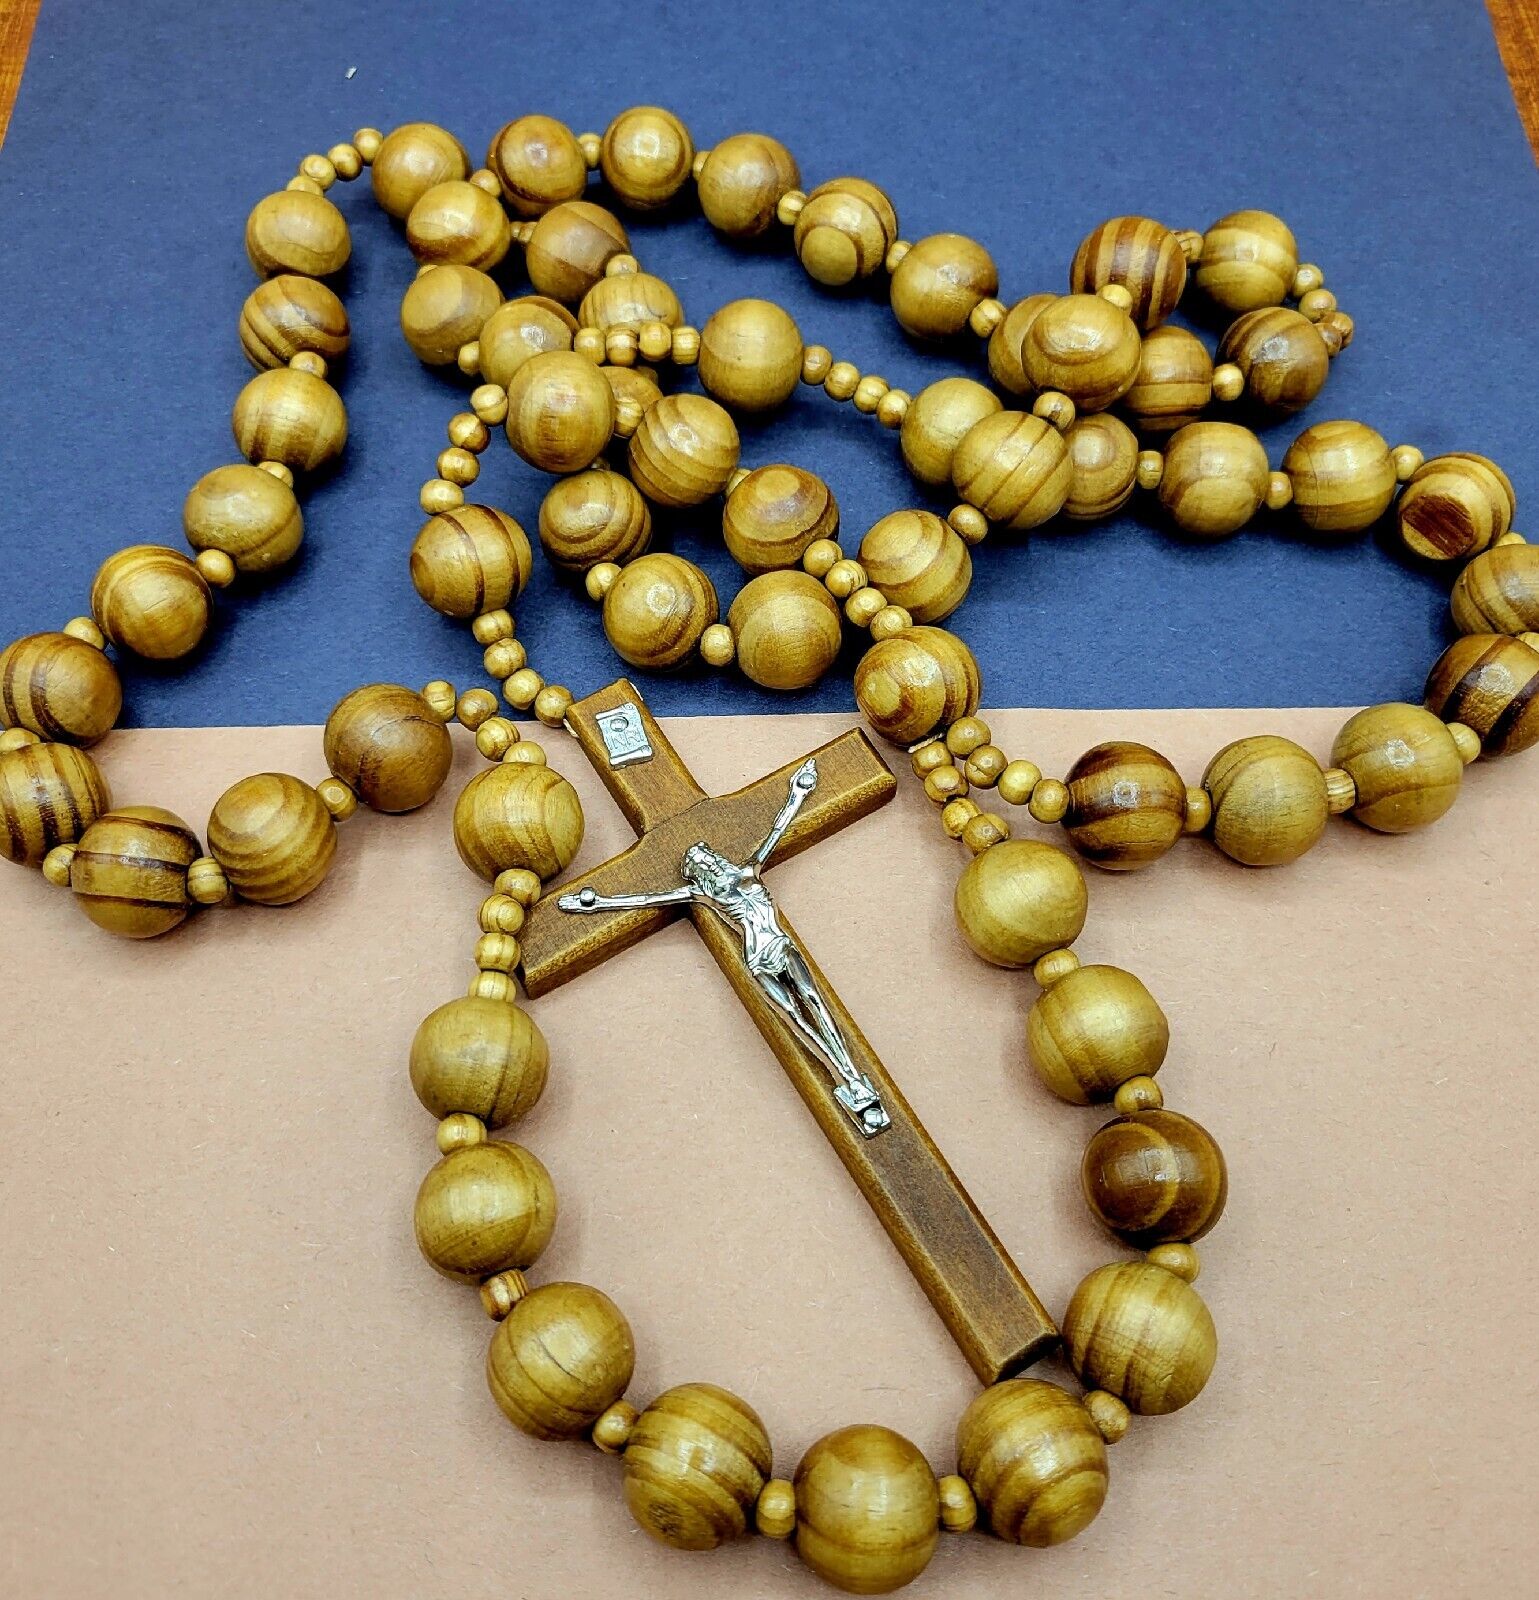 Wall Large Catholic ROSARY Wooden beads Wooden Cross XL Large 39 Inches Approxim